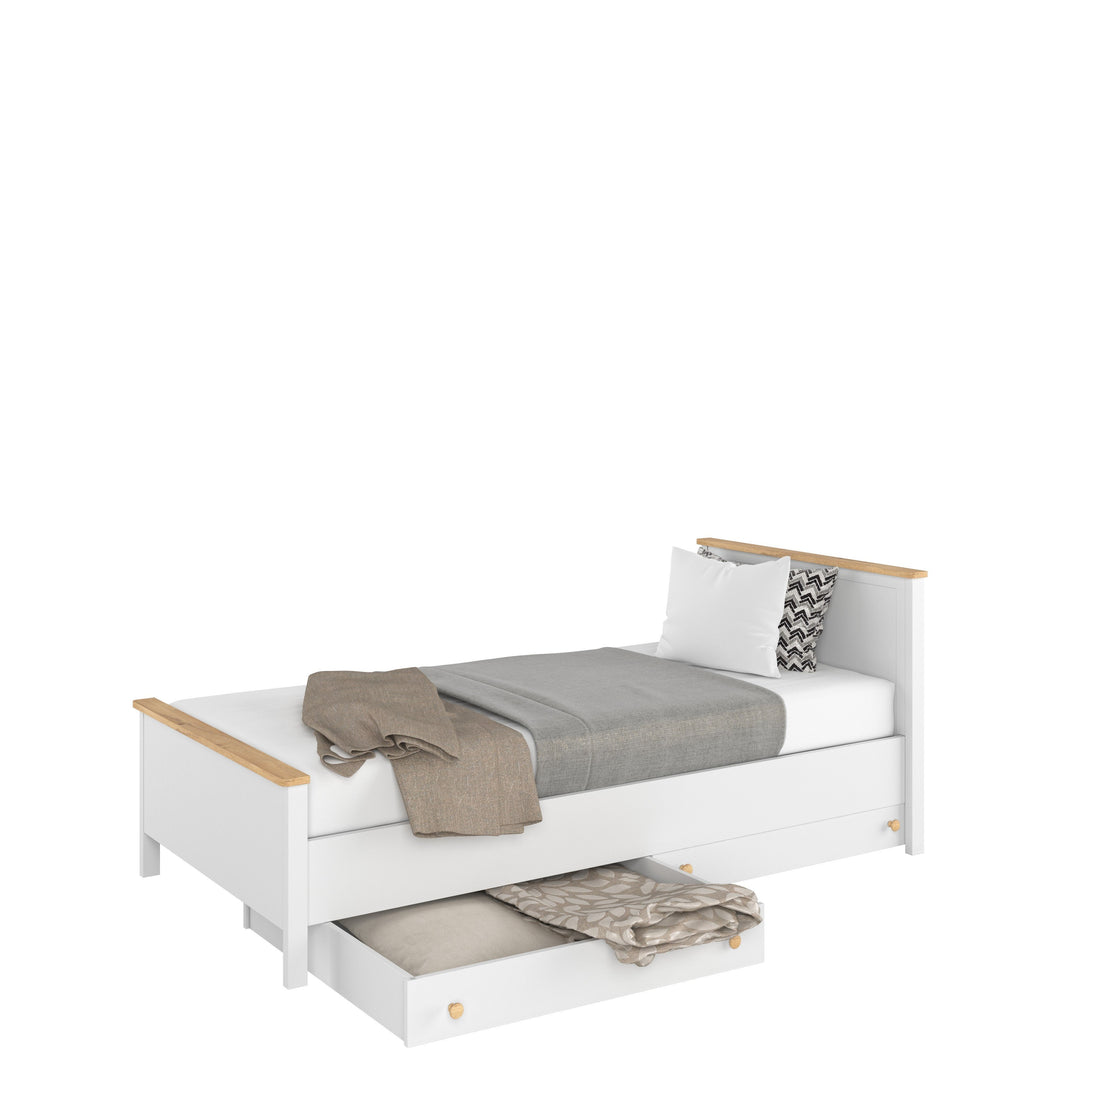 Story SO-08 Bed with Mattress - £302.4 - Kids Single Bed 